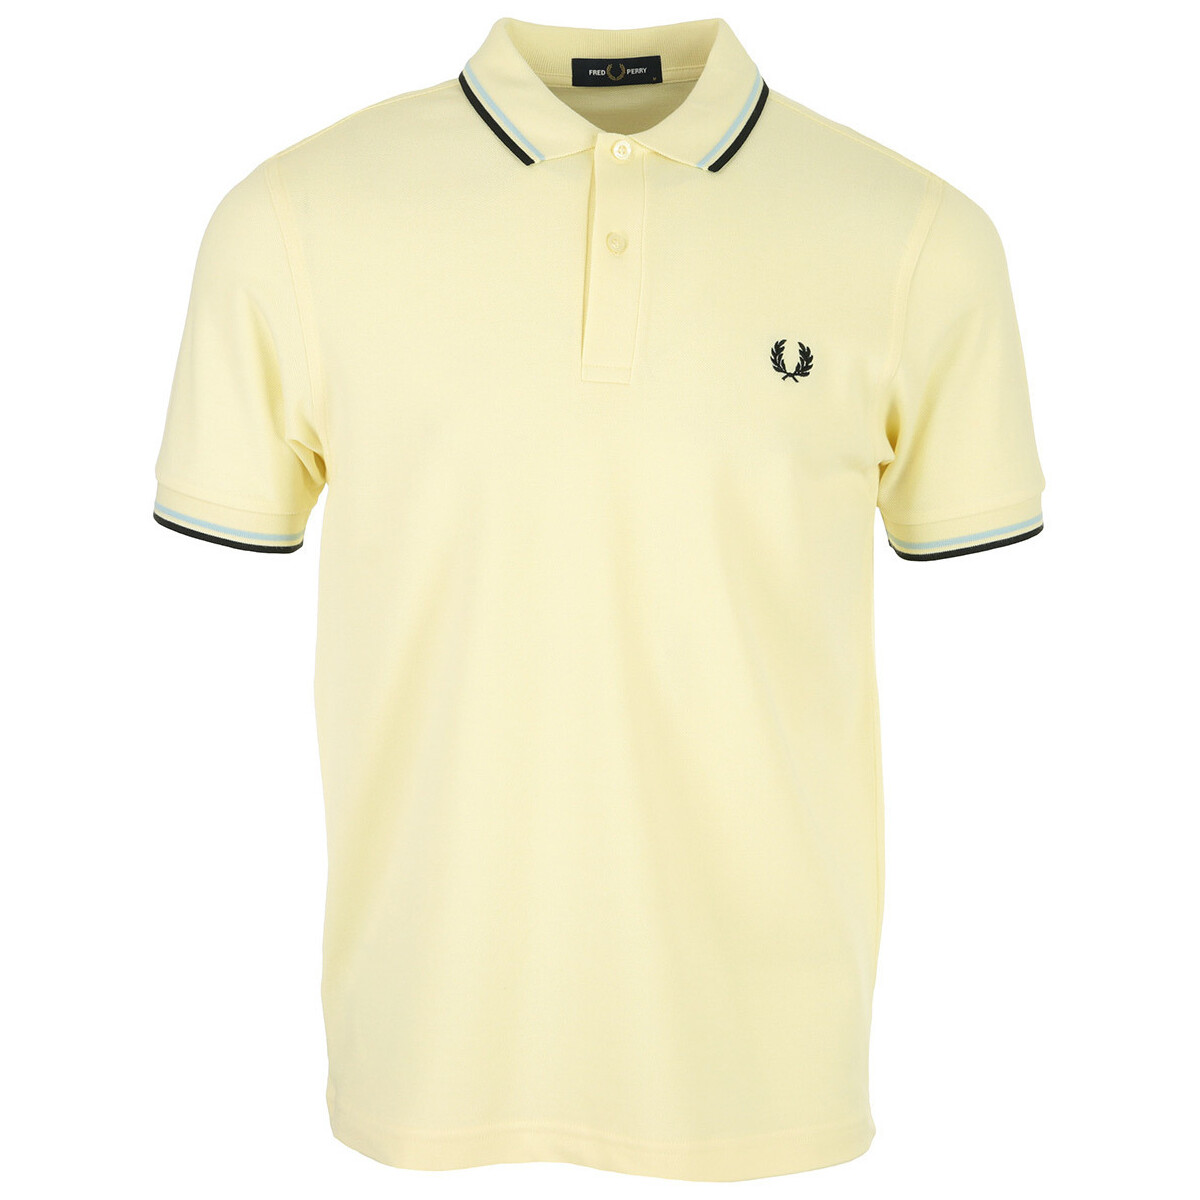 Kleidung Herren T-Shirts & Poloshirts Fred Perry Twin Tipped Gelb